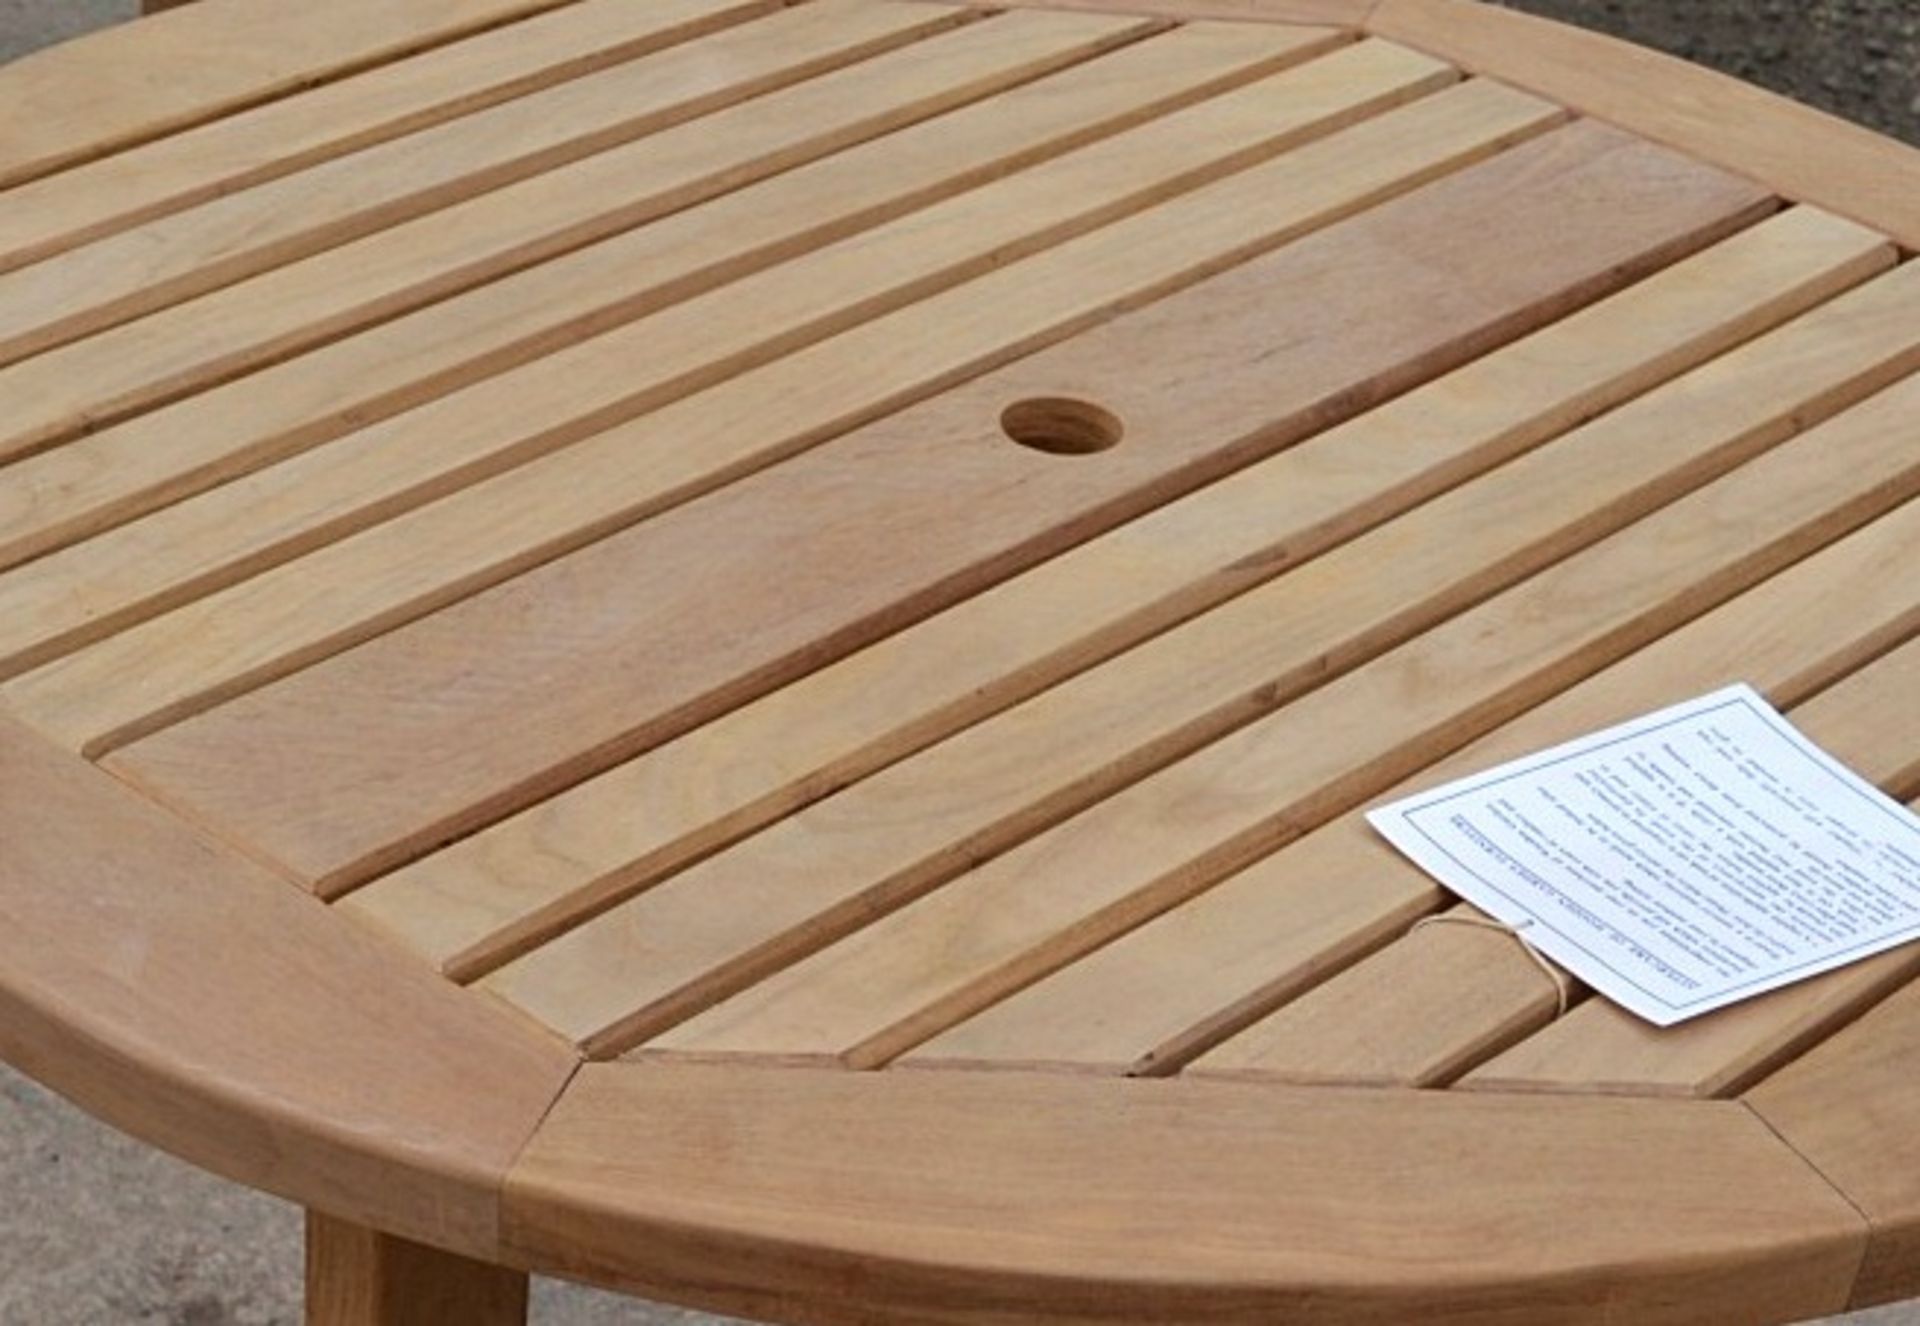 1 x Solid Teak Garden Patio Table - New, Boxed Stock - CL403 - Location: Cheshire WA16 - Image 4 of 4